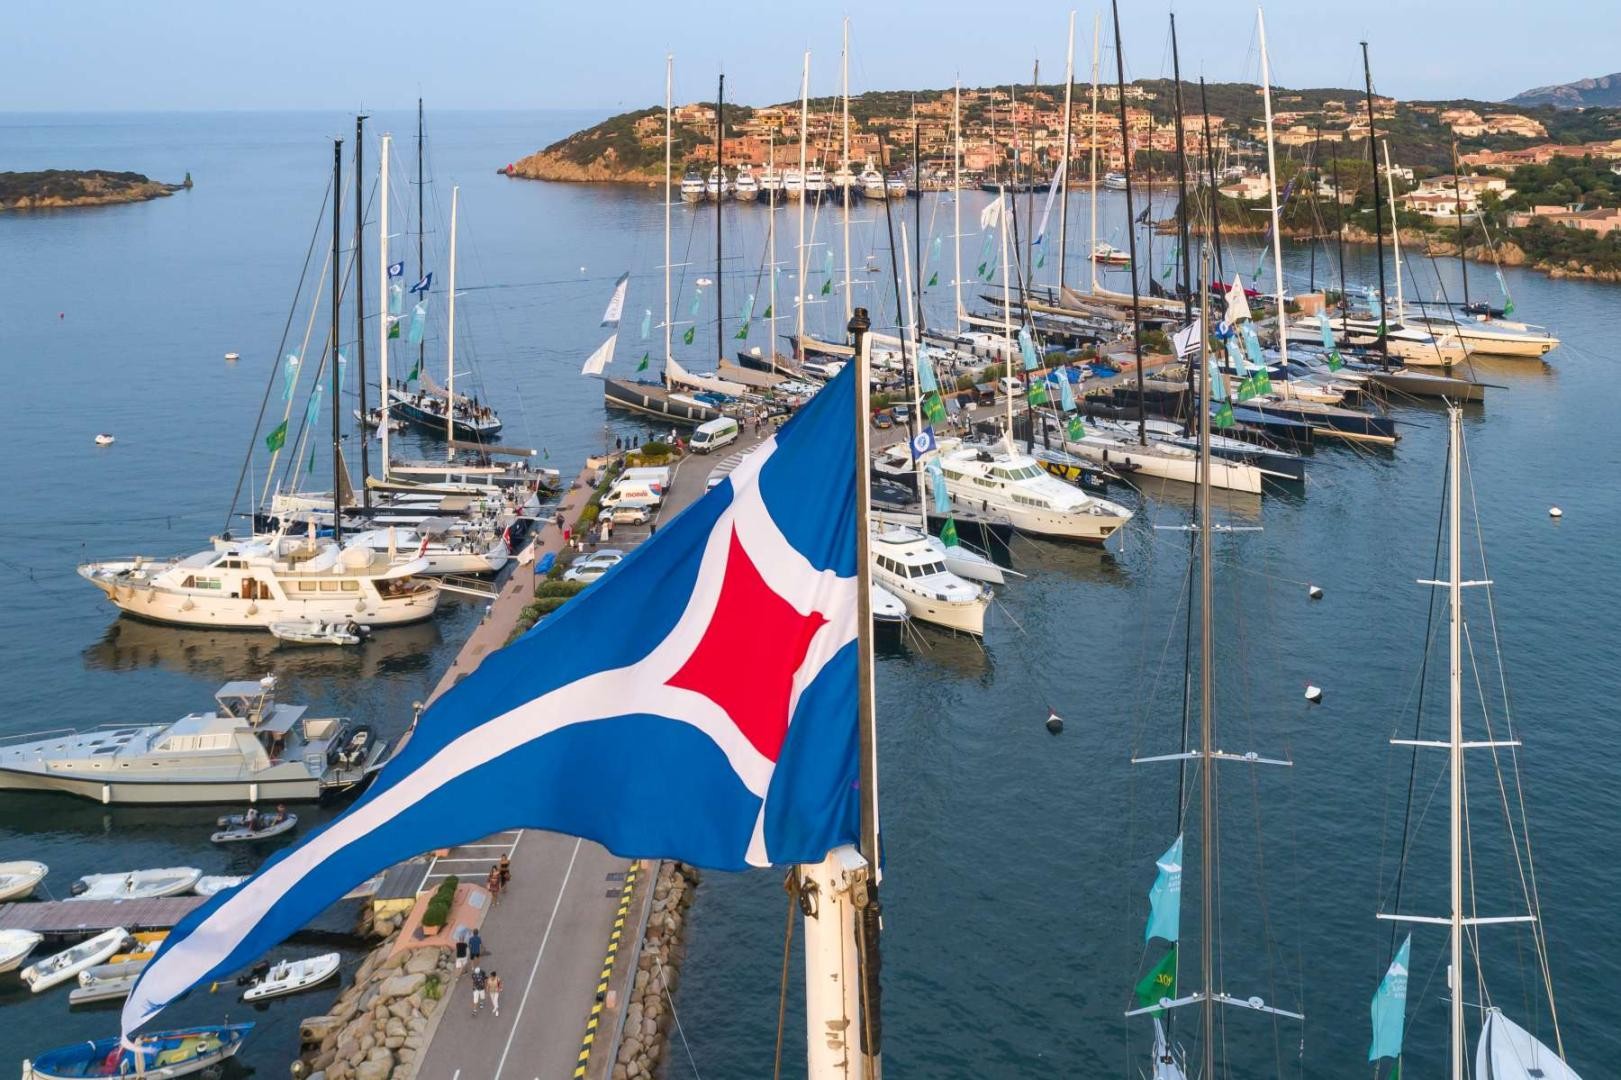 The Yacht Club Costa Smeralda reopening safely